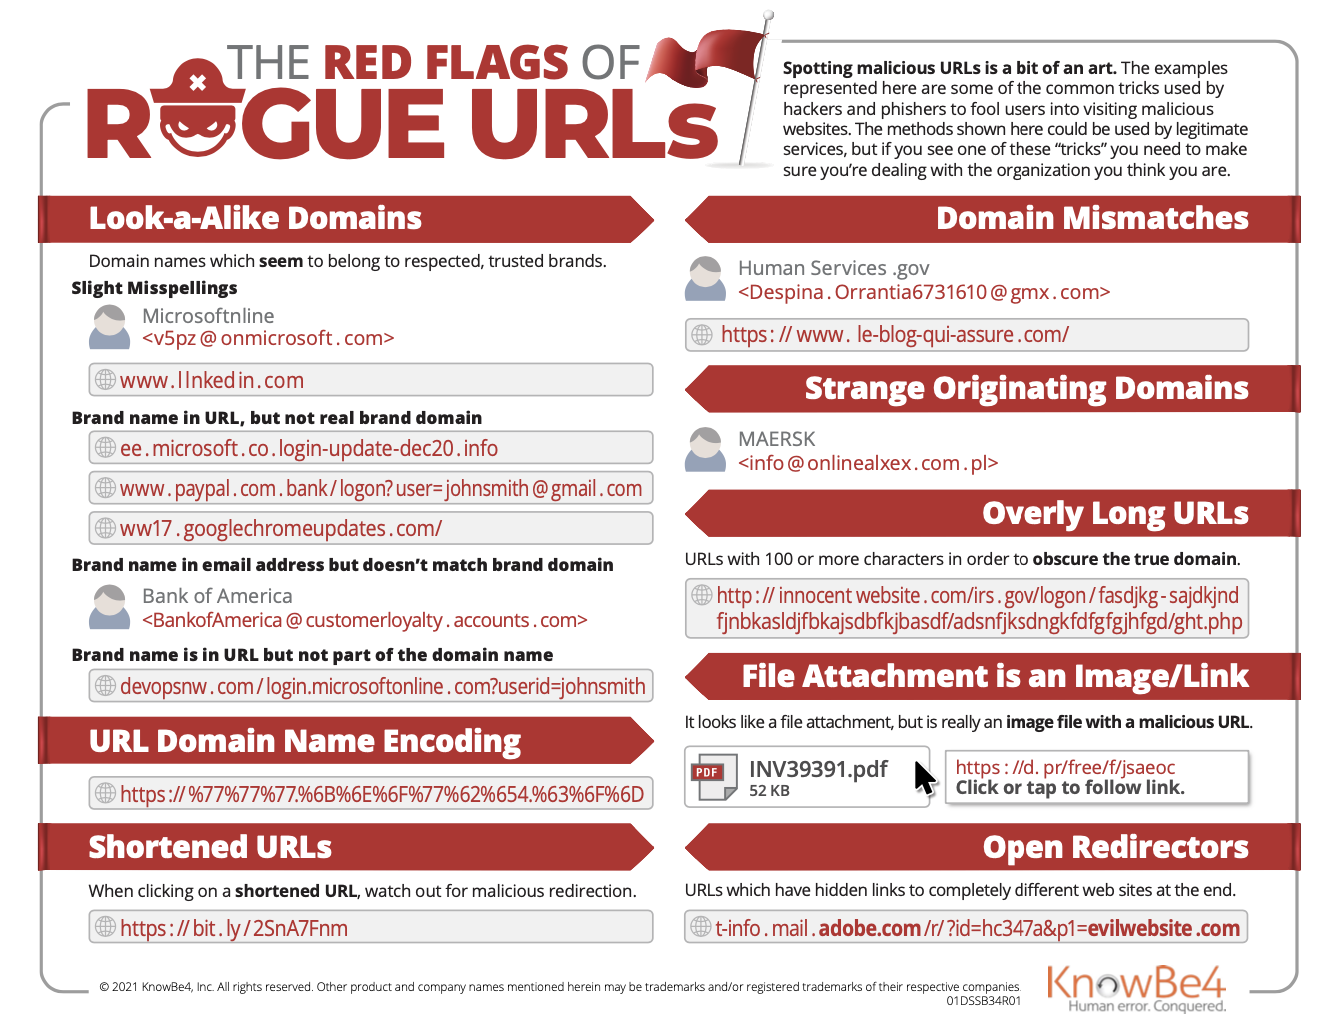 Red Flags of Rogue URLS